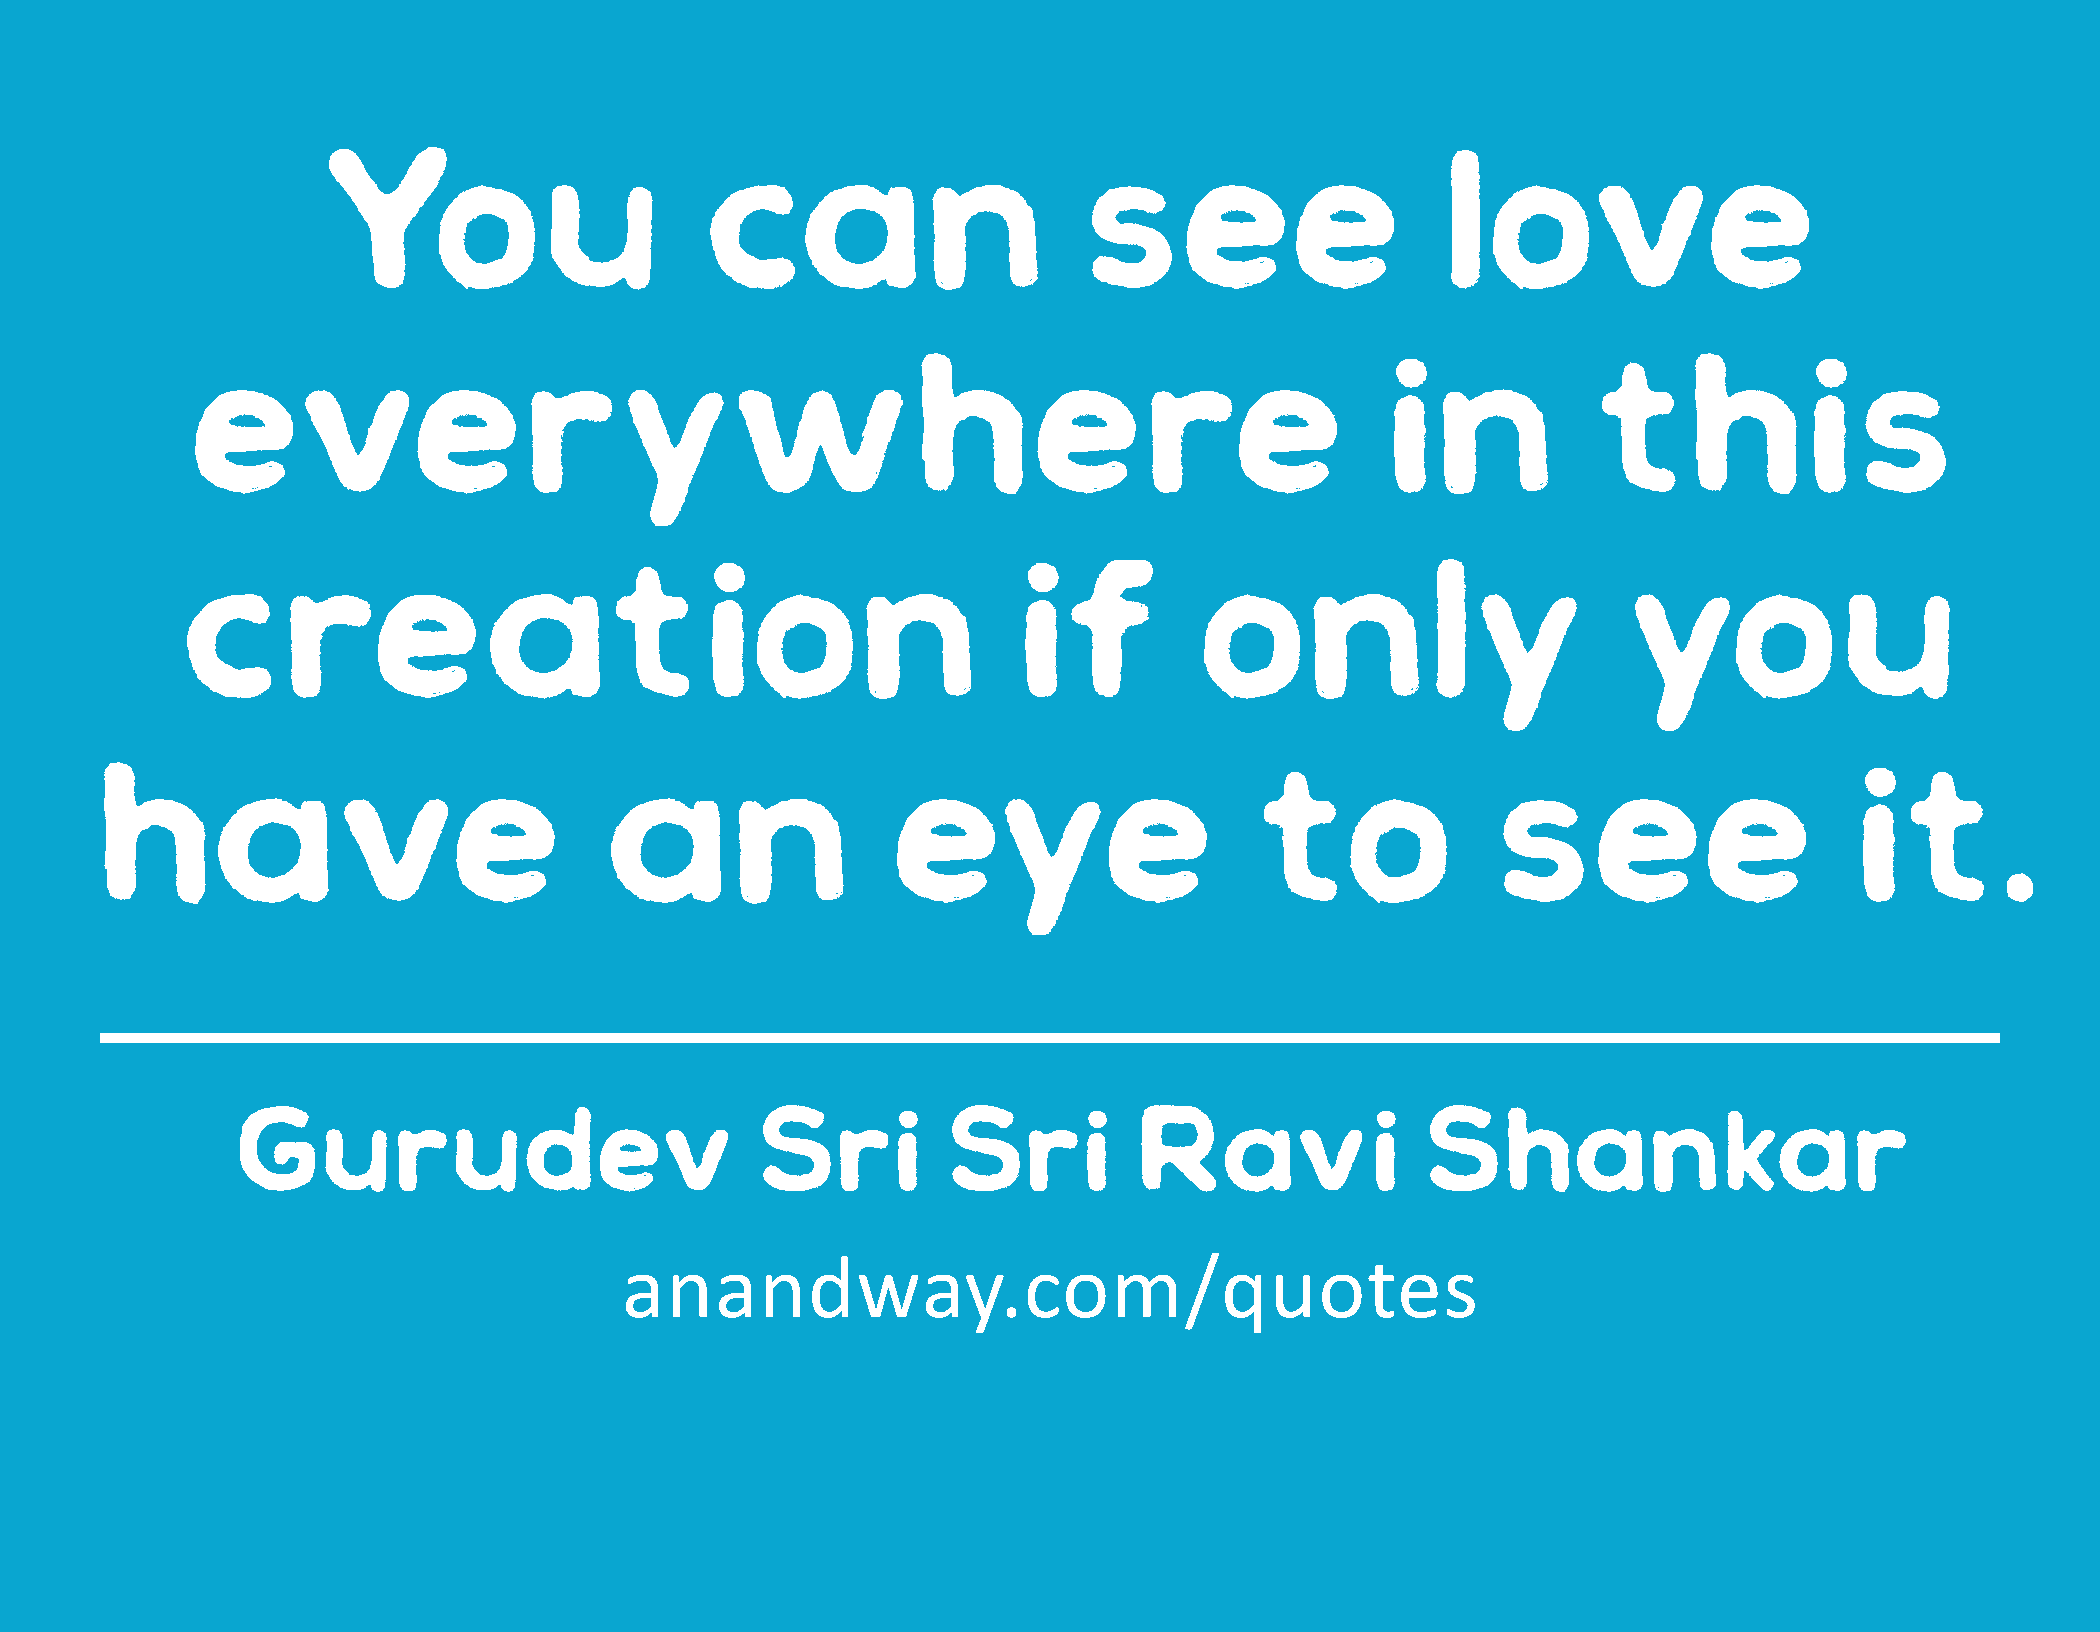 You can see love everywhere in this creation if only you have an eye to see it. 
 -Gurudev Sri Sri Ravi Shankar